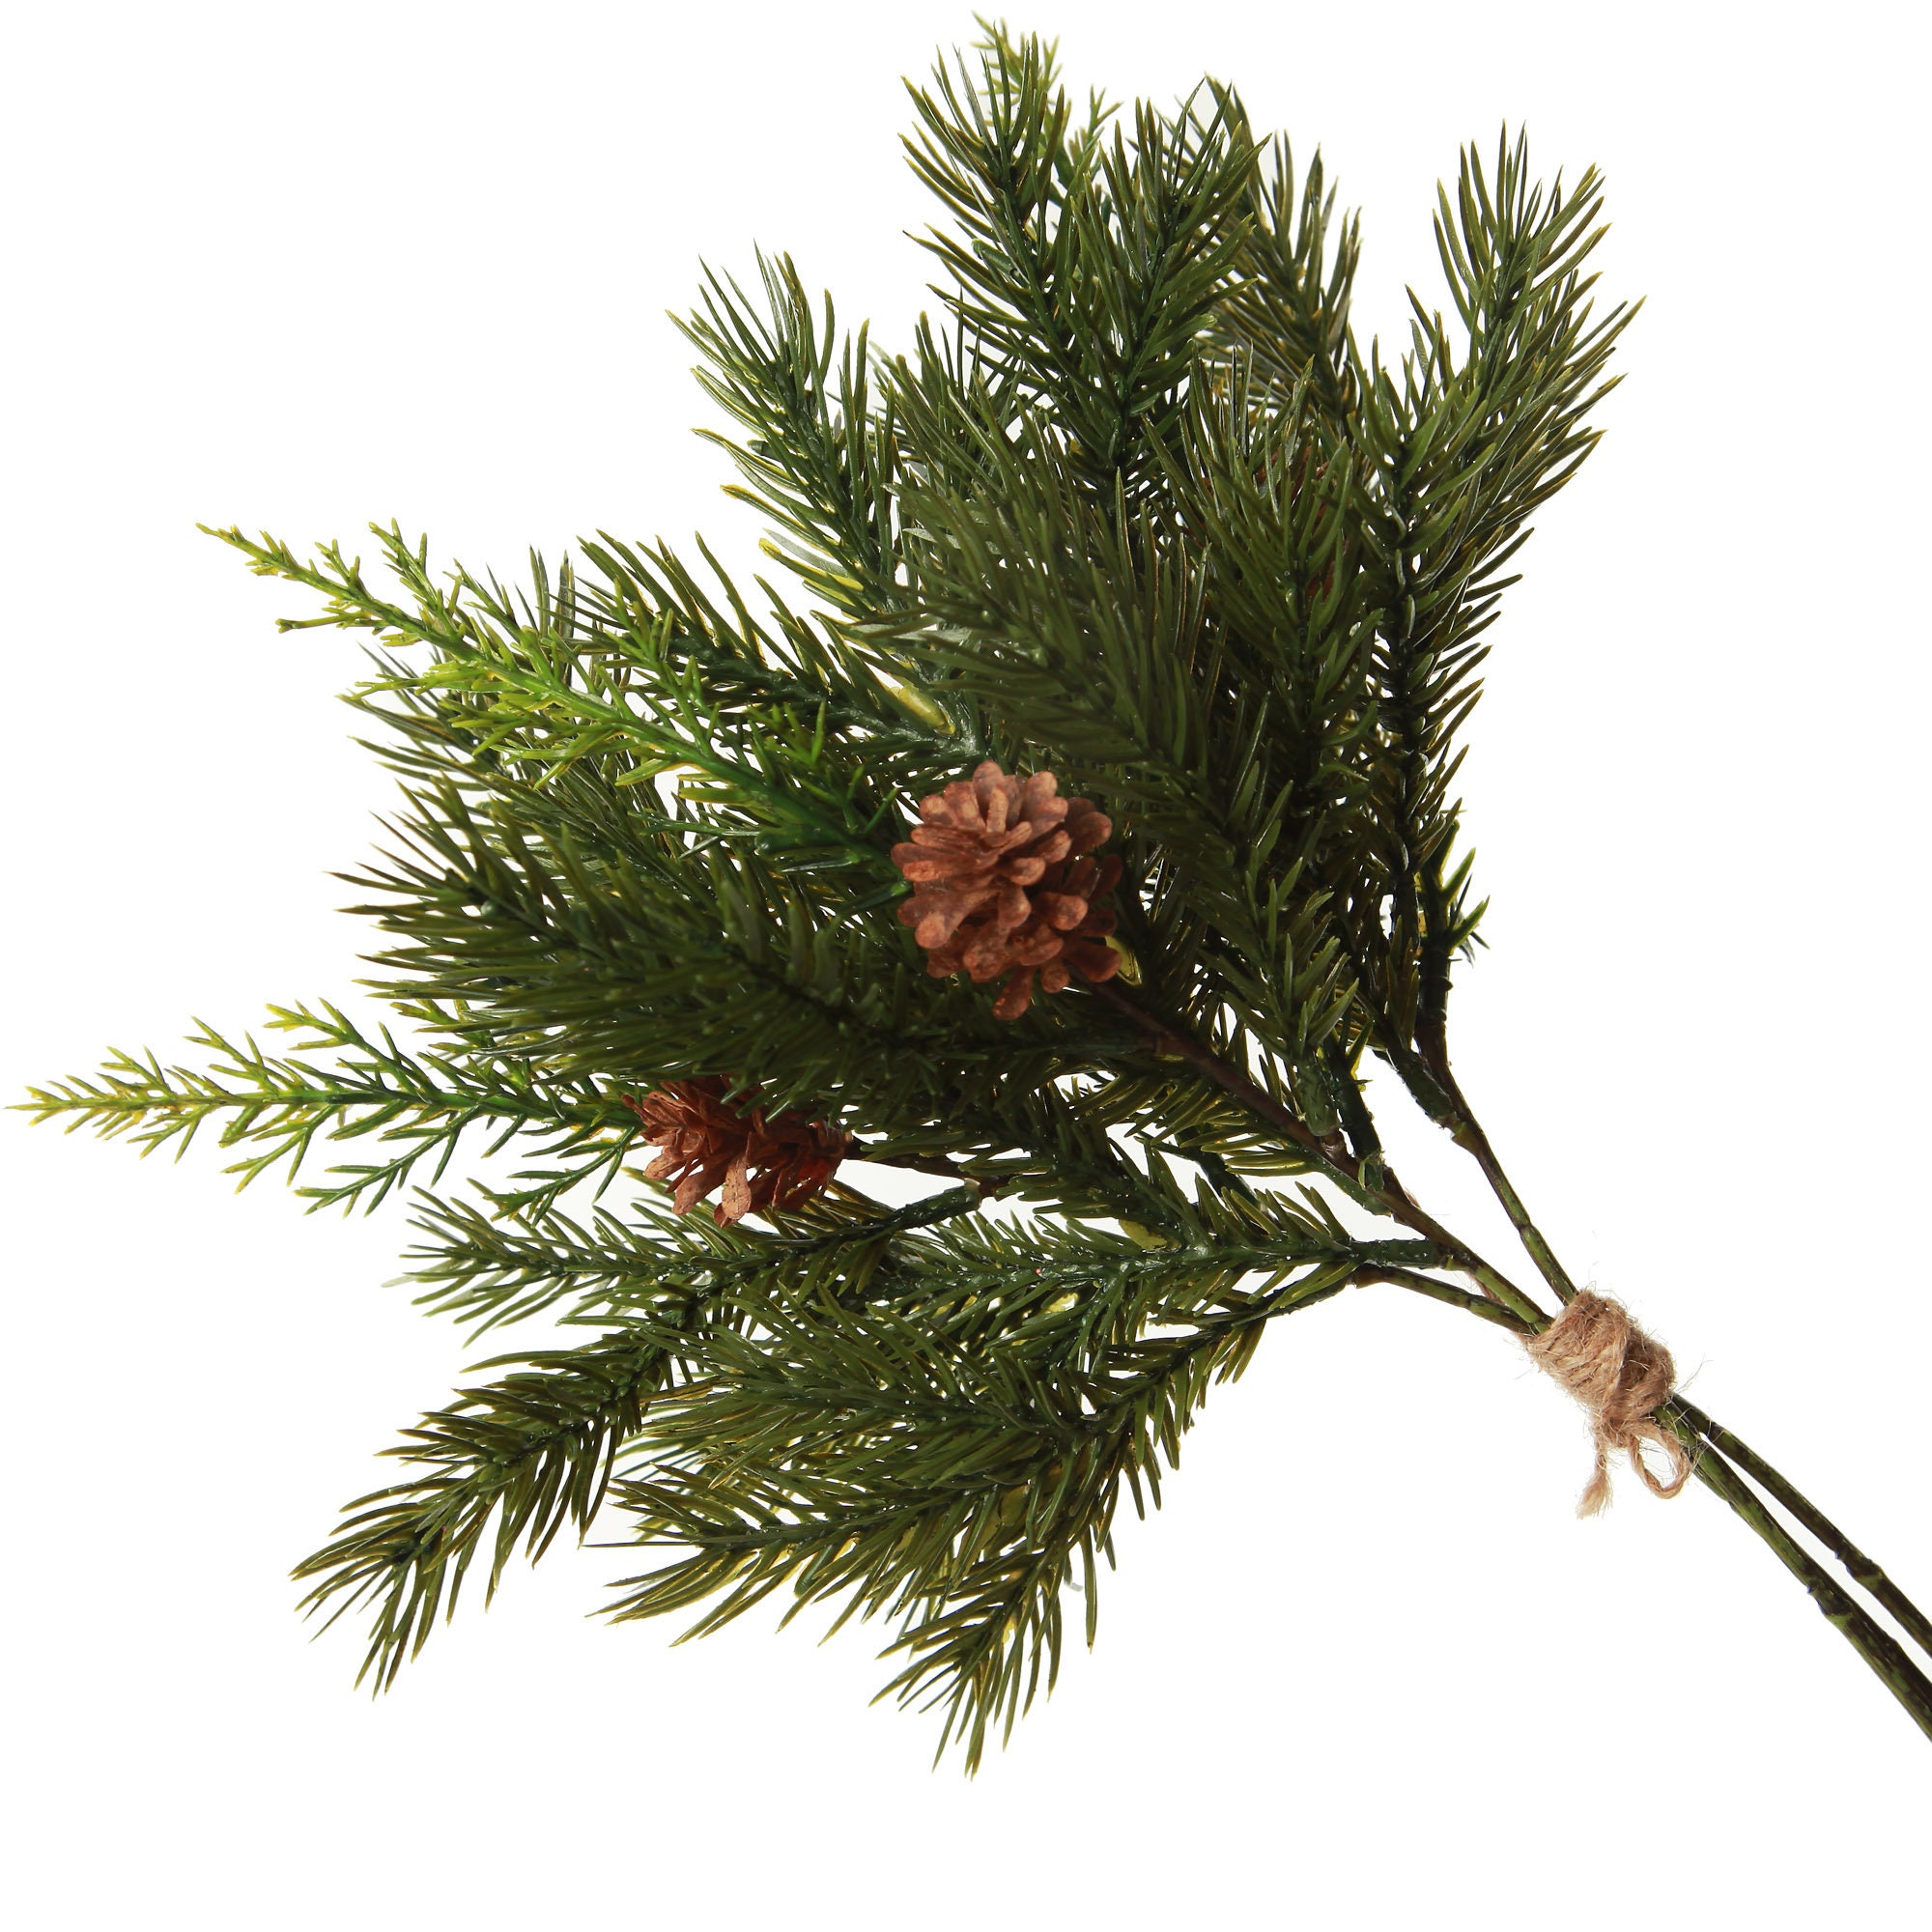 Christmas Pine Picks and Sprays for Holiday, Christmas, Winter  Arrangements, Wreaths & Centerpieces, Wreath Supplies, Holiday Decor  Supplies 